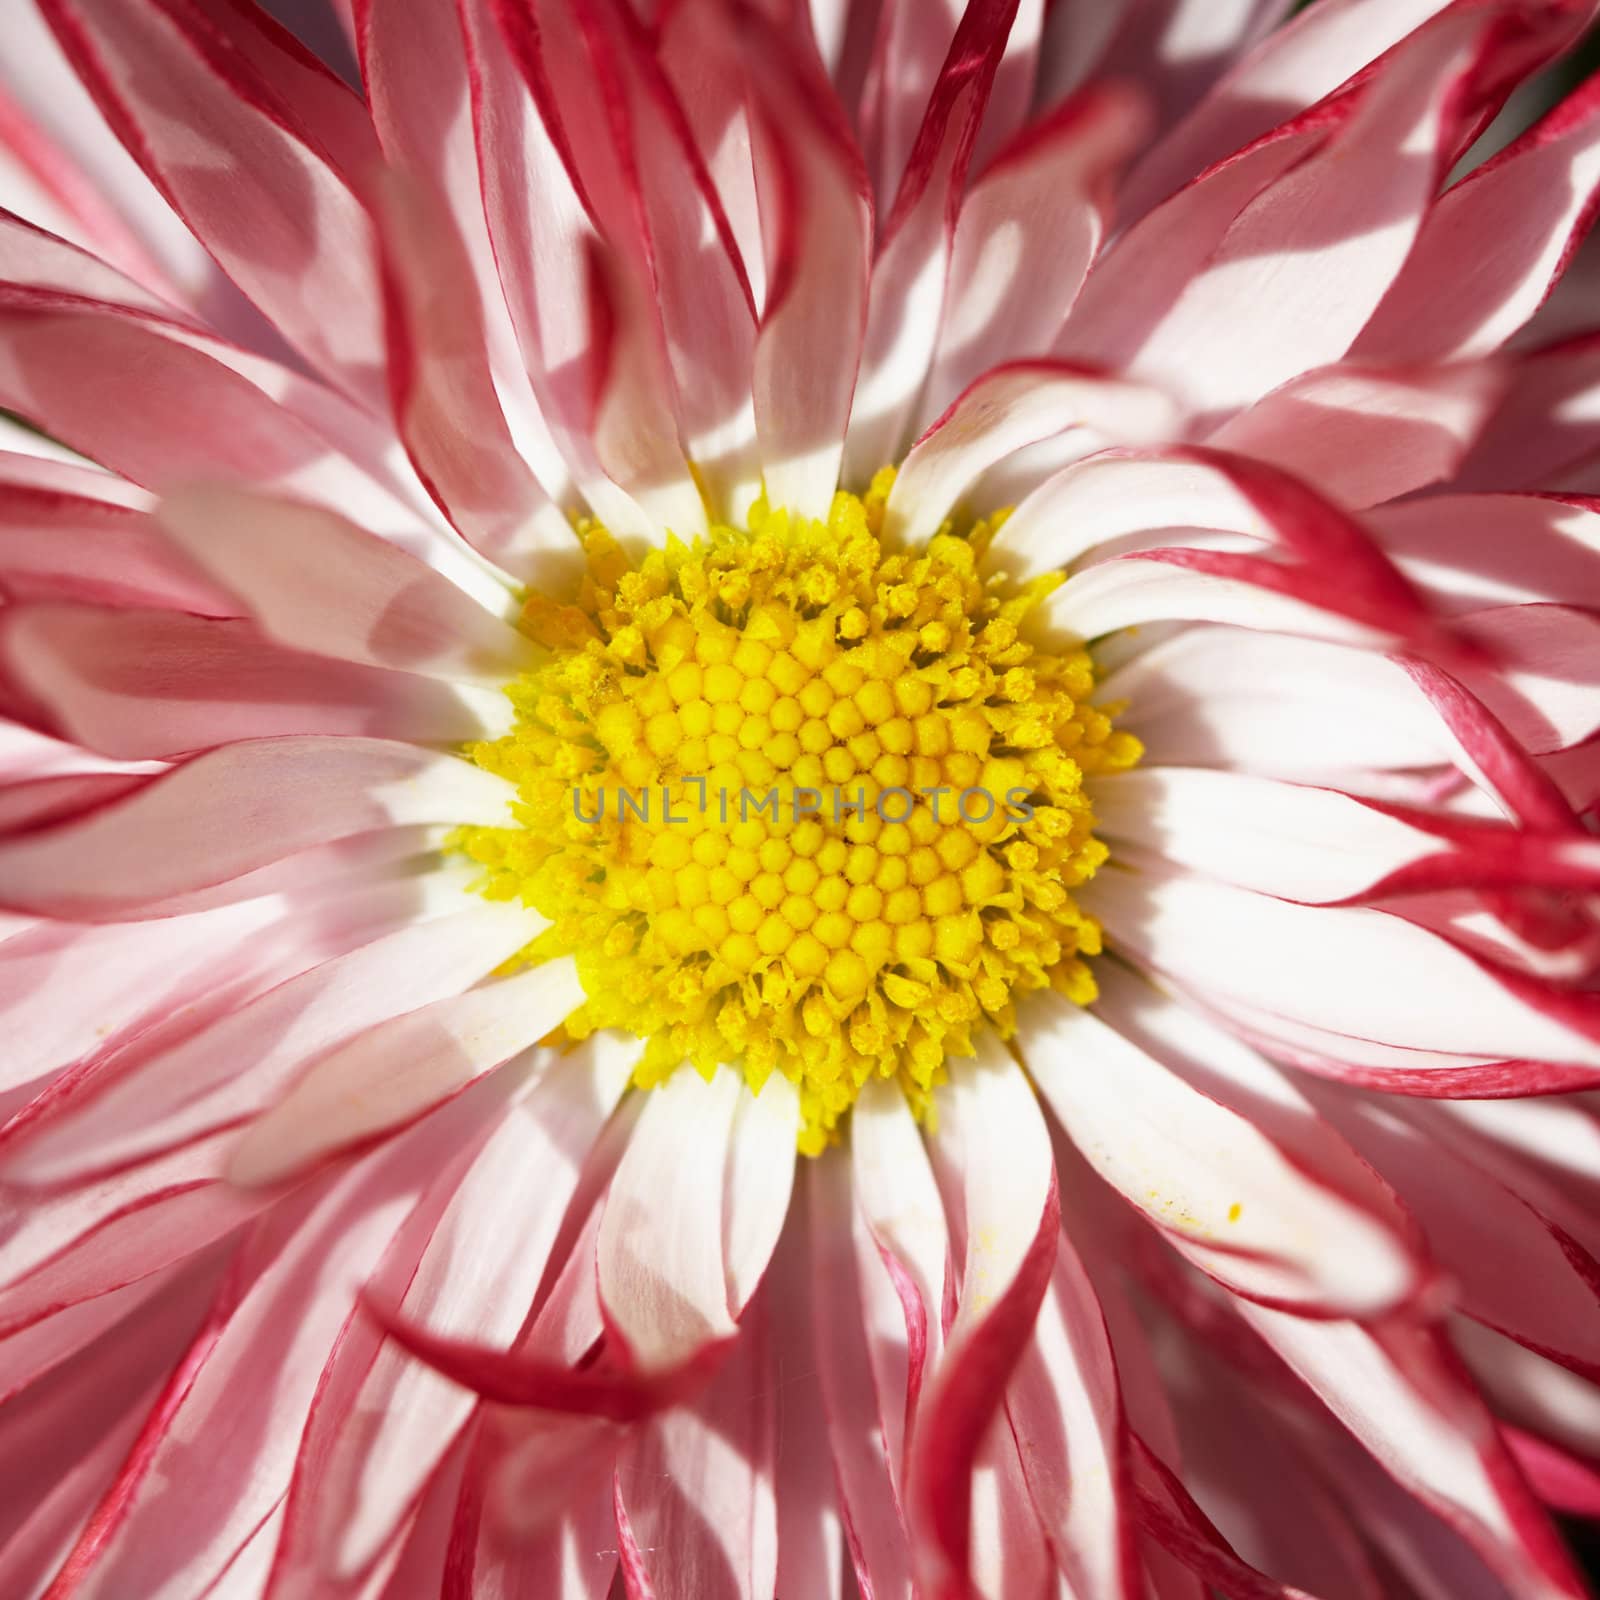 Decorative red flower with yellow middle - close-up